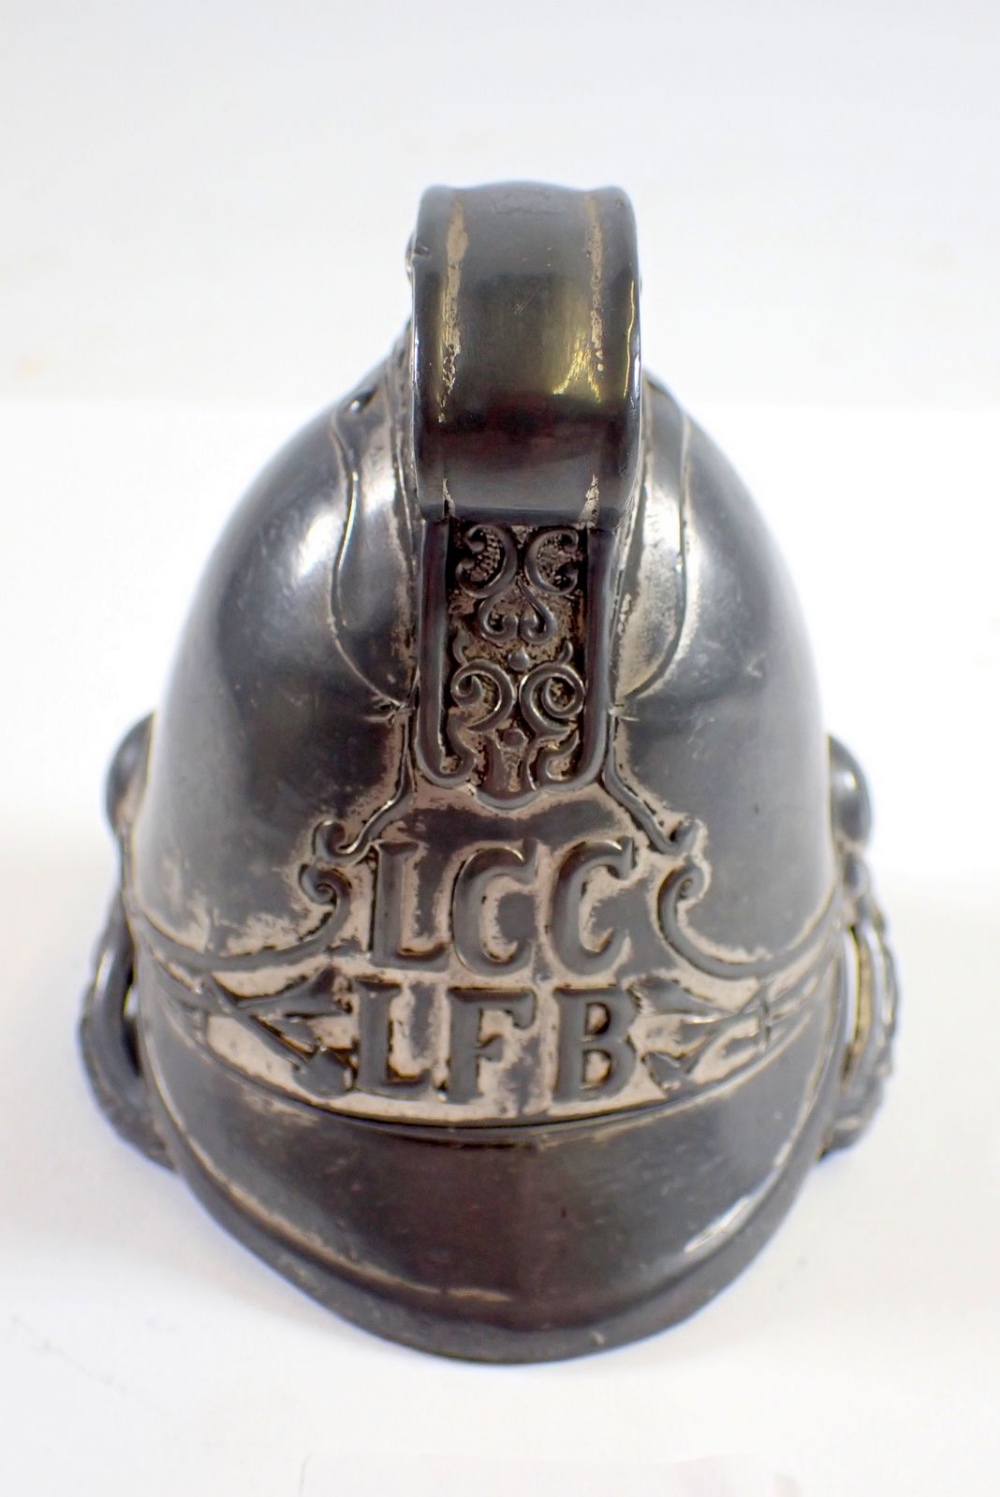 A novelty inkwell in form of a London fireman's helmet, LCC LBF, 10cm - Image 2 of 3